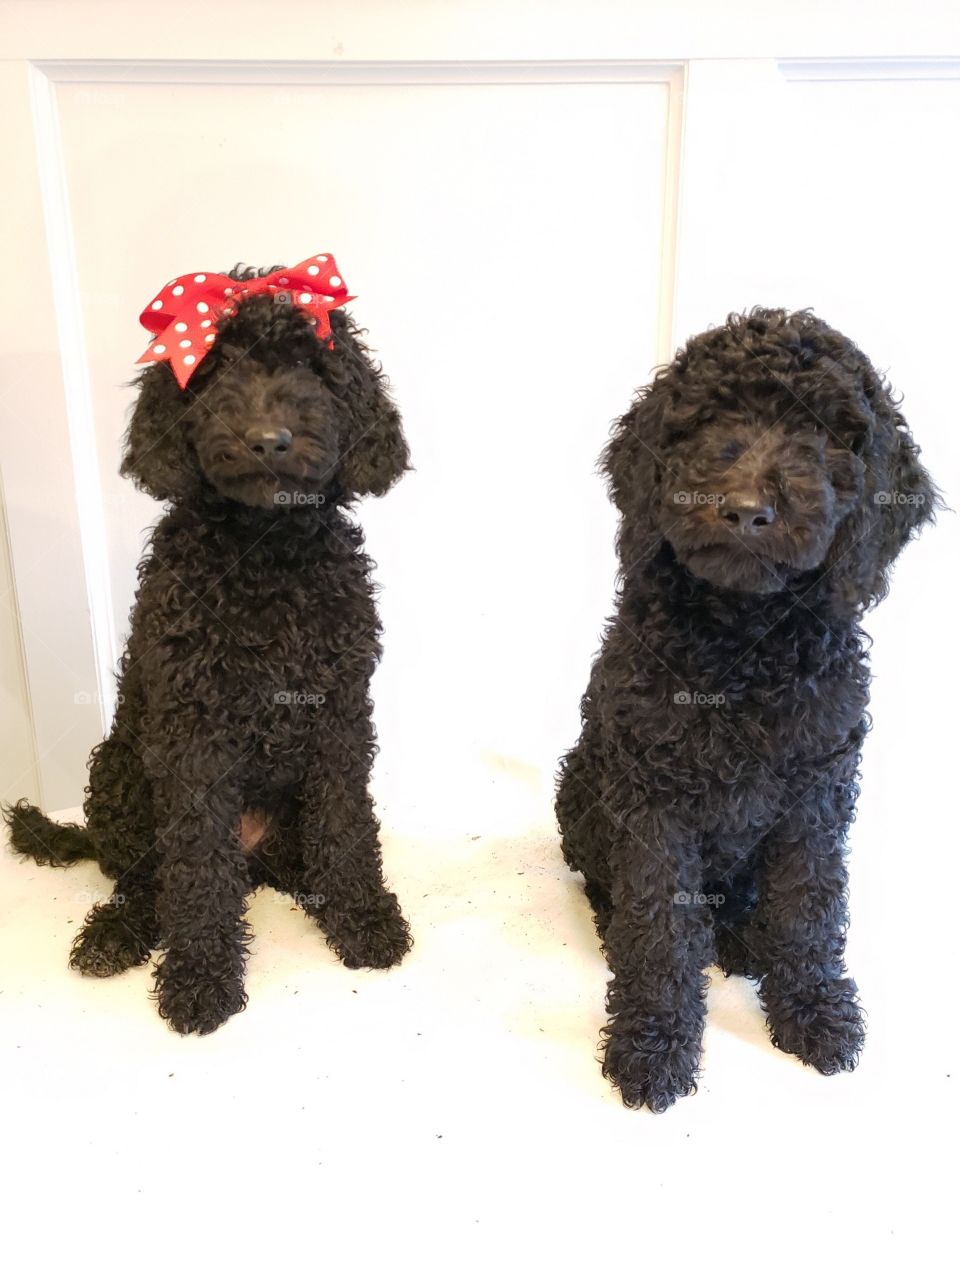 Standard Poodle Siblings...Mickey and Minnie!